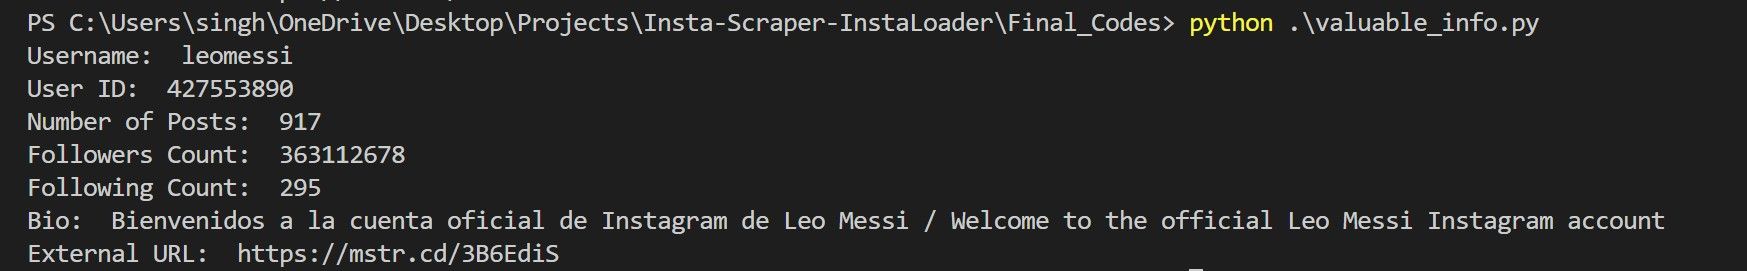 output screenshot of extracting info from Messi's insta profile